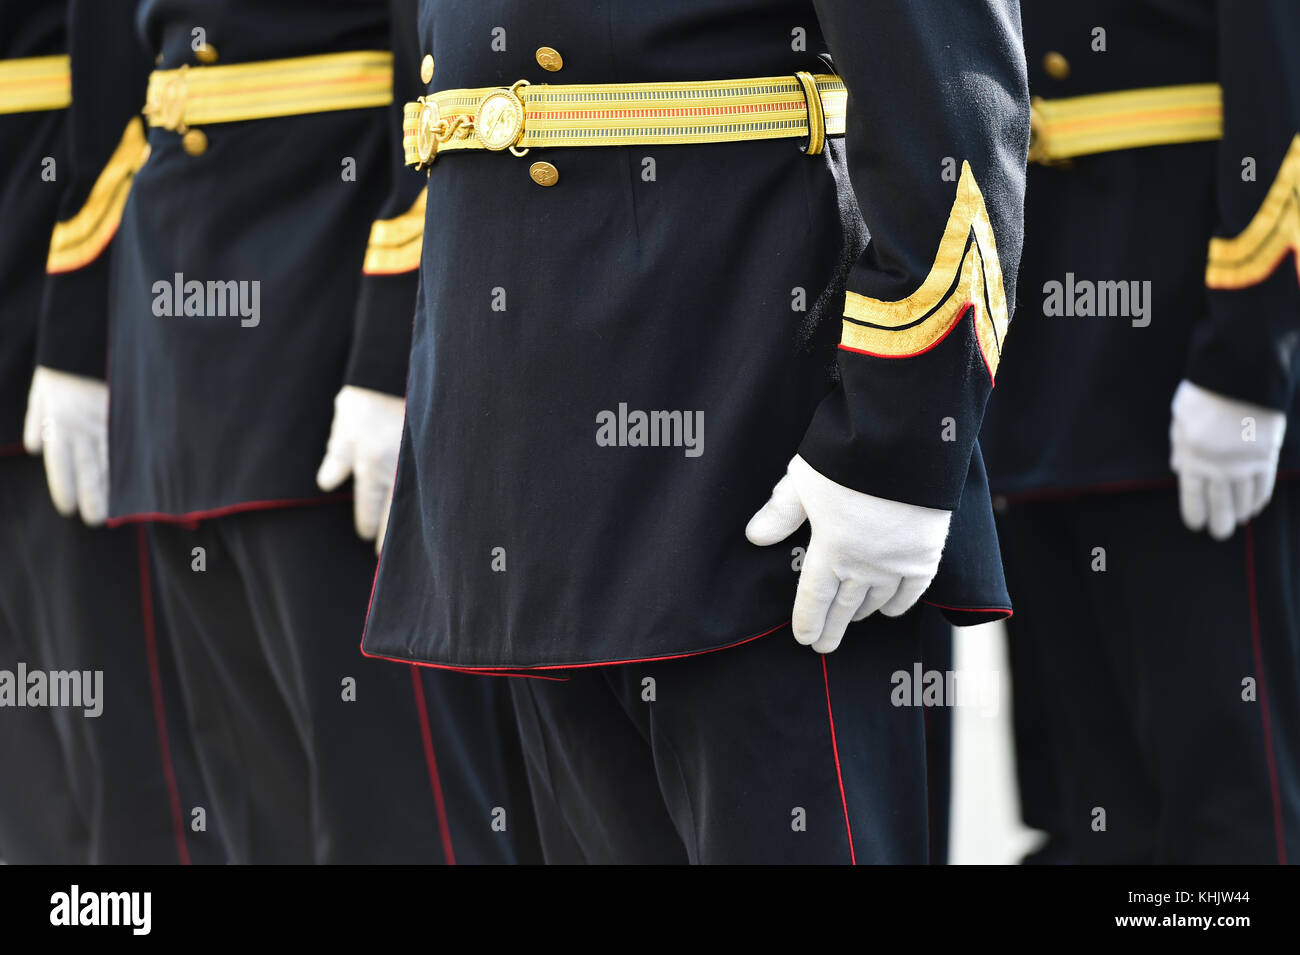 Soldiers from a national guard of honor during a military ceremony Stock Photo